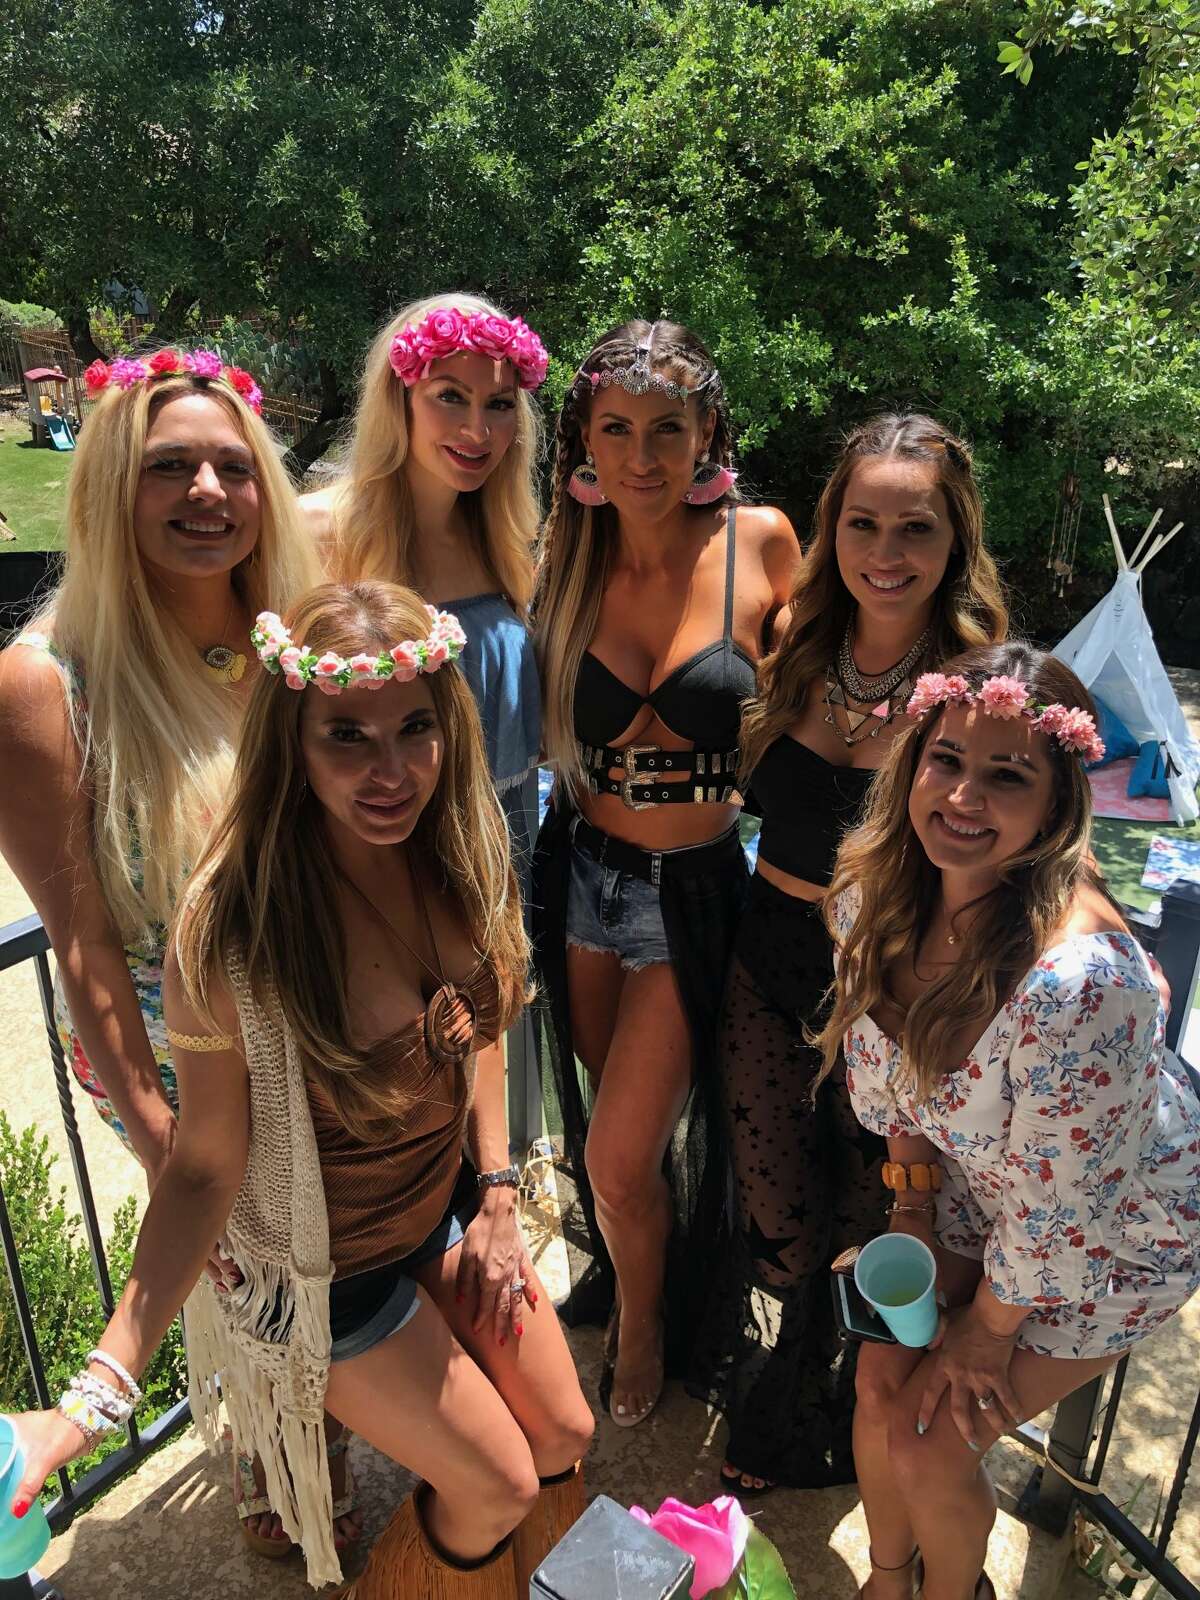 The Texicanas celebrated Penelope's birthday with a Cochella-themed party aka 'Penchella.'